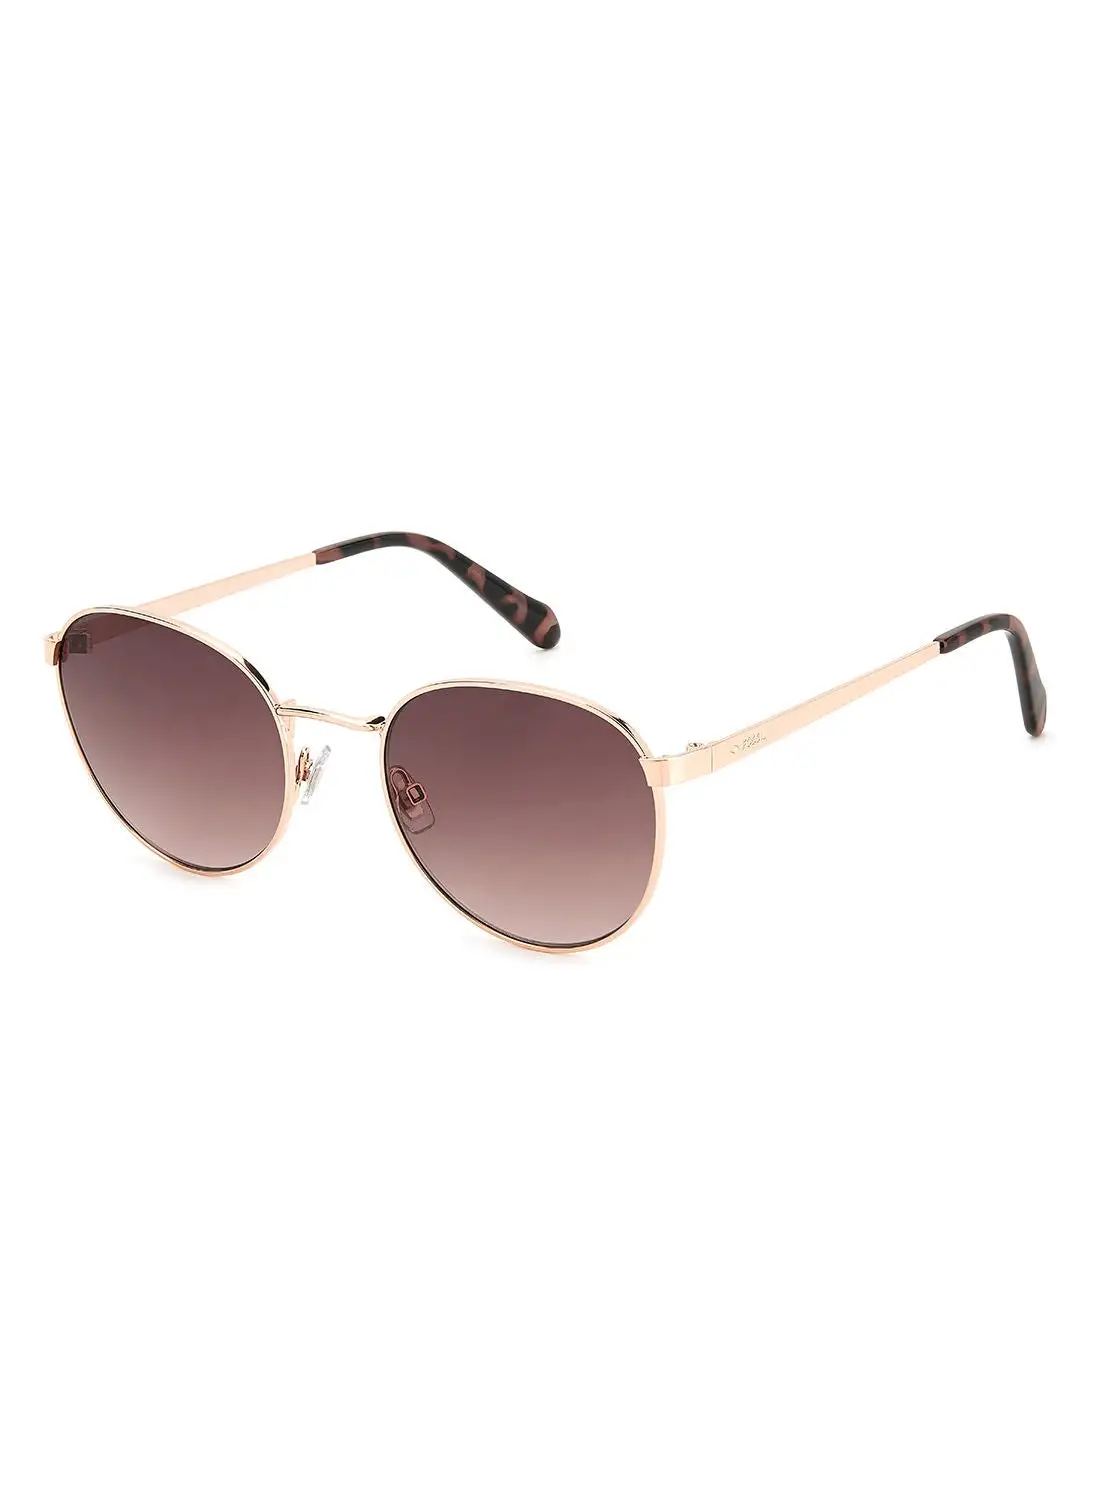 FOSSIL Women's UV Protection Round Sunglasses - Fos 2129/G/S Red Gold 52 - Lens Size: 52 Mm